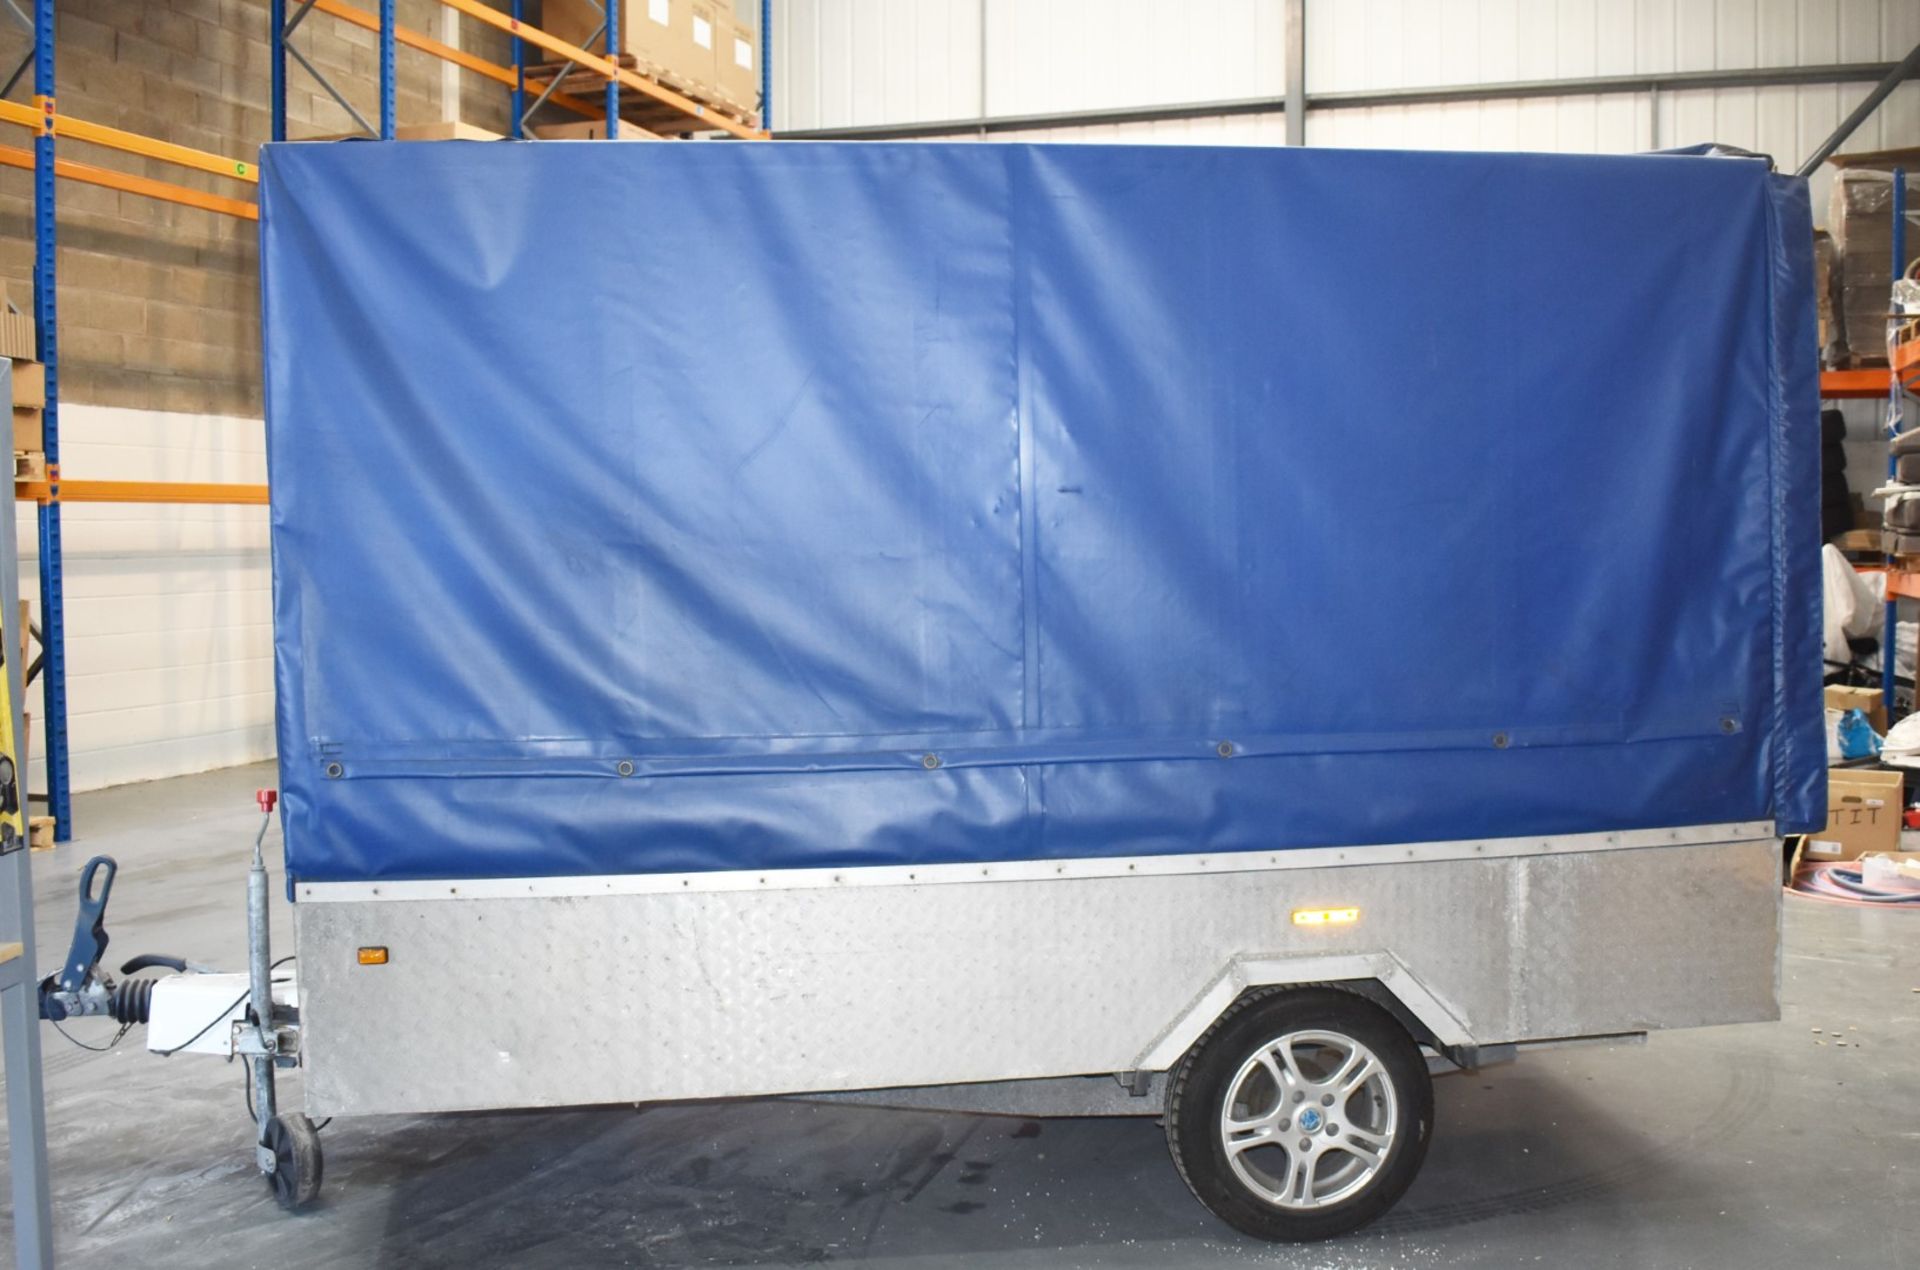 1 x Customised 10x6ft Tow Trailer With Aluminium Frame Enclosure and Heavy Duty Cover, BP WS3000 - Image 7 of 13